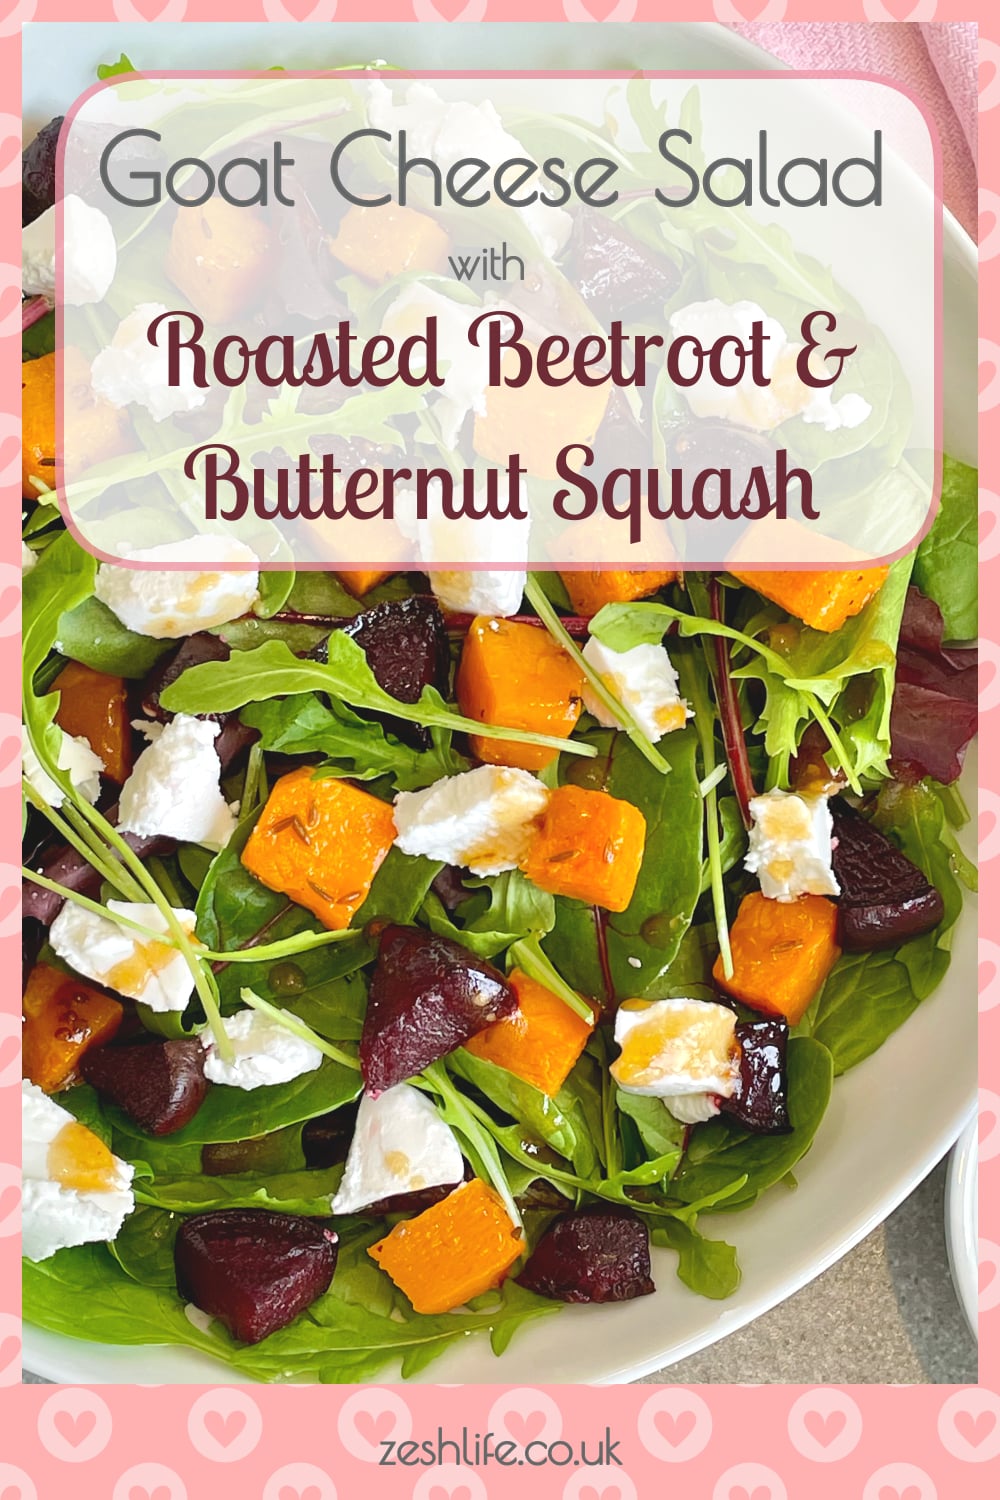 Goat Cheese Salad with Roasted Beetroot & Butternut Squash Recipe Pin